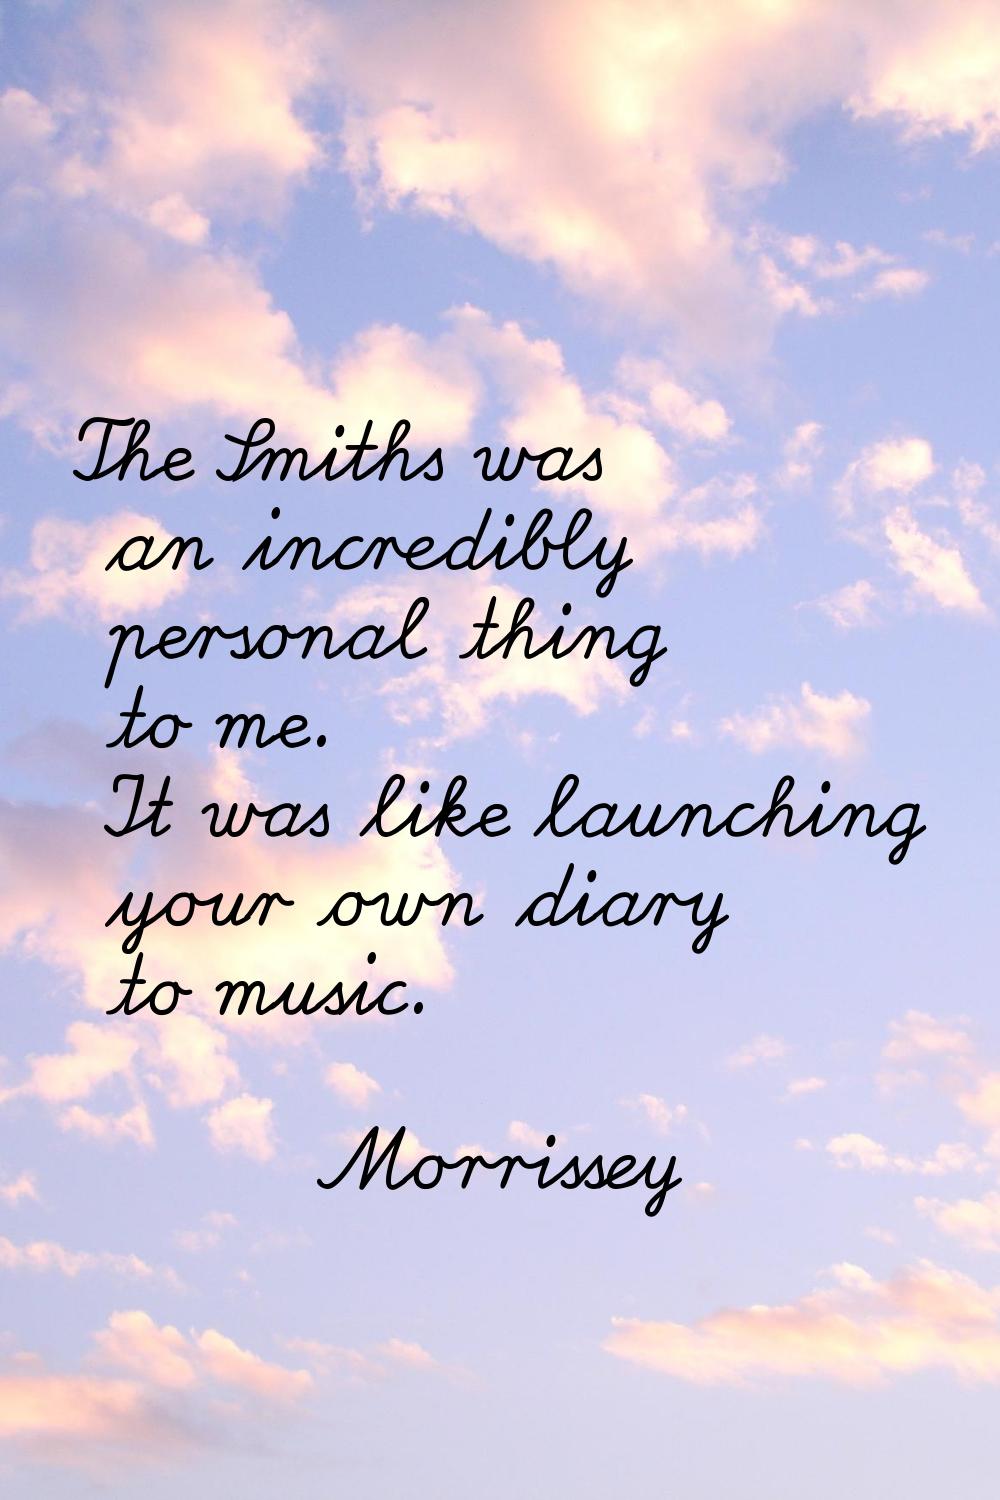 The Smiths was an incredibly personal thing to me. It was like launching your own diary to music.